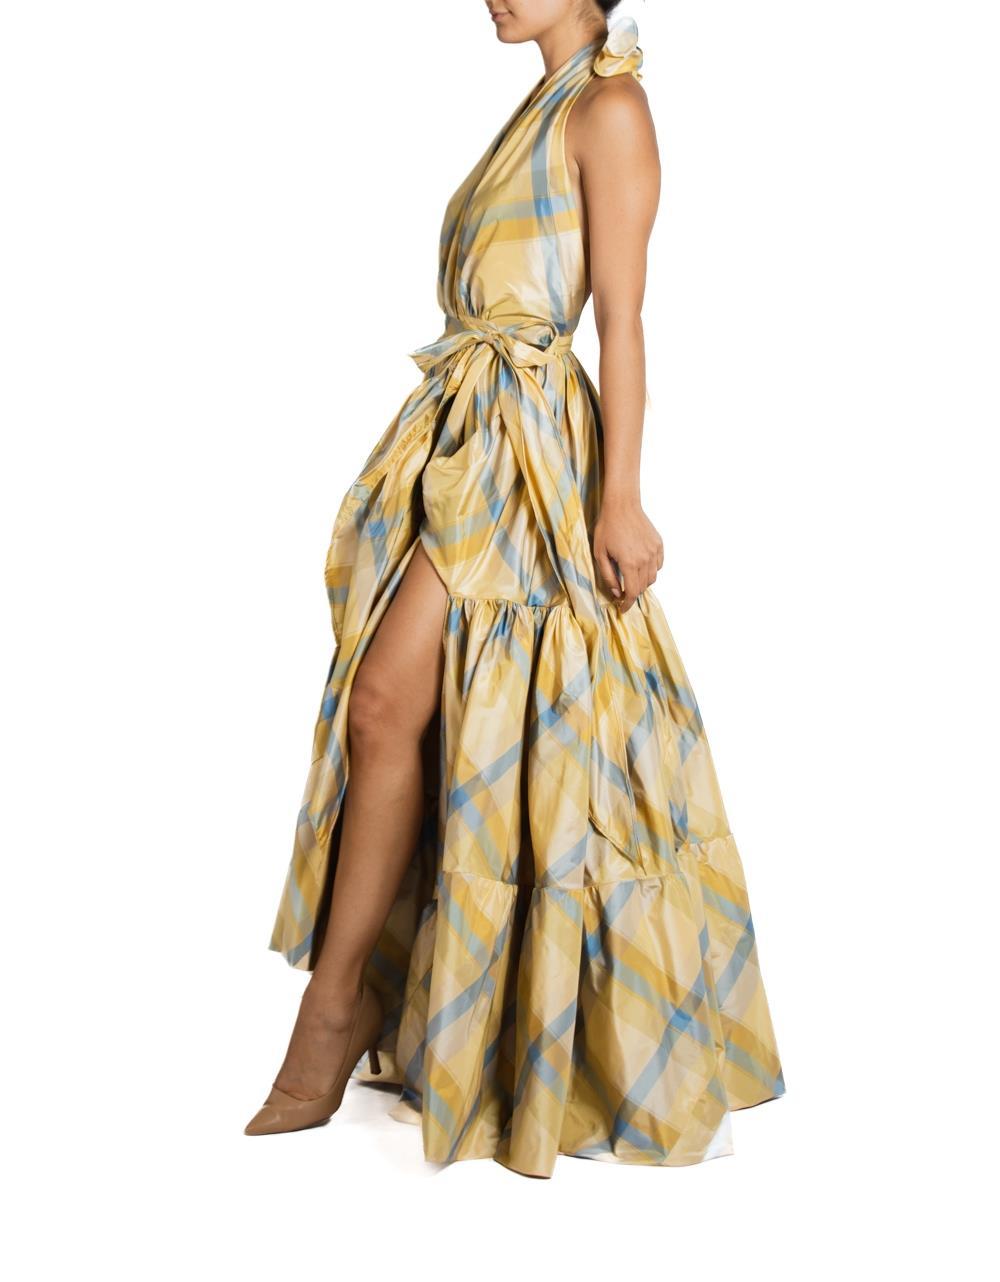 This dress fits multiple sizes from a 2 to a 12 with an adjustable waste Morphew Collection Yellow & Blue Silk Taffeta Plaid Gown 
MORPHEW COLLECTION is made entirely by hand in our NYC Ateliér of rare antique materials sourced from around the